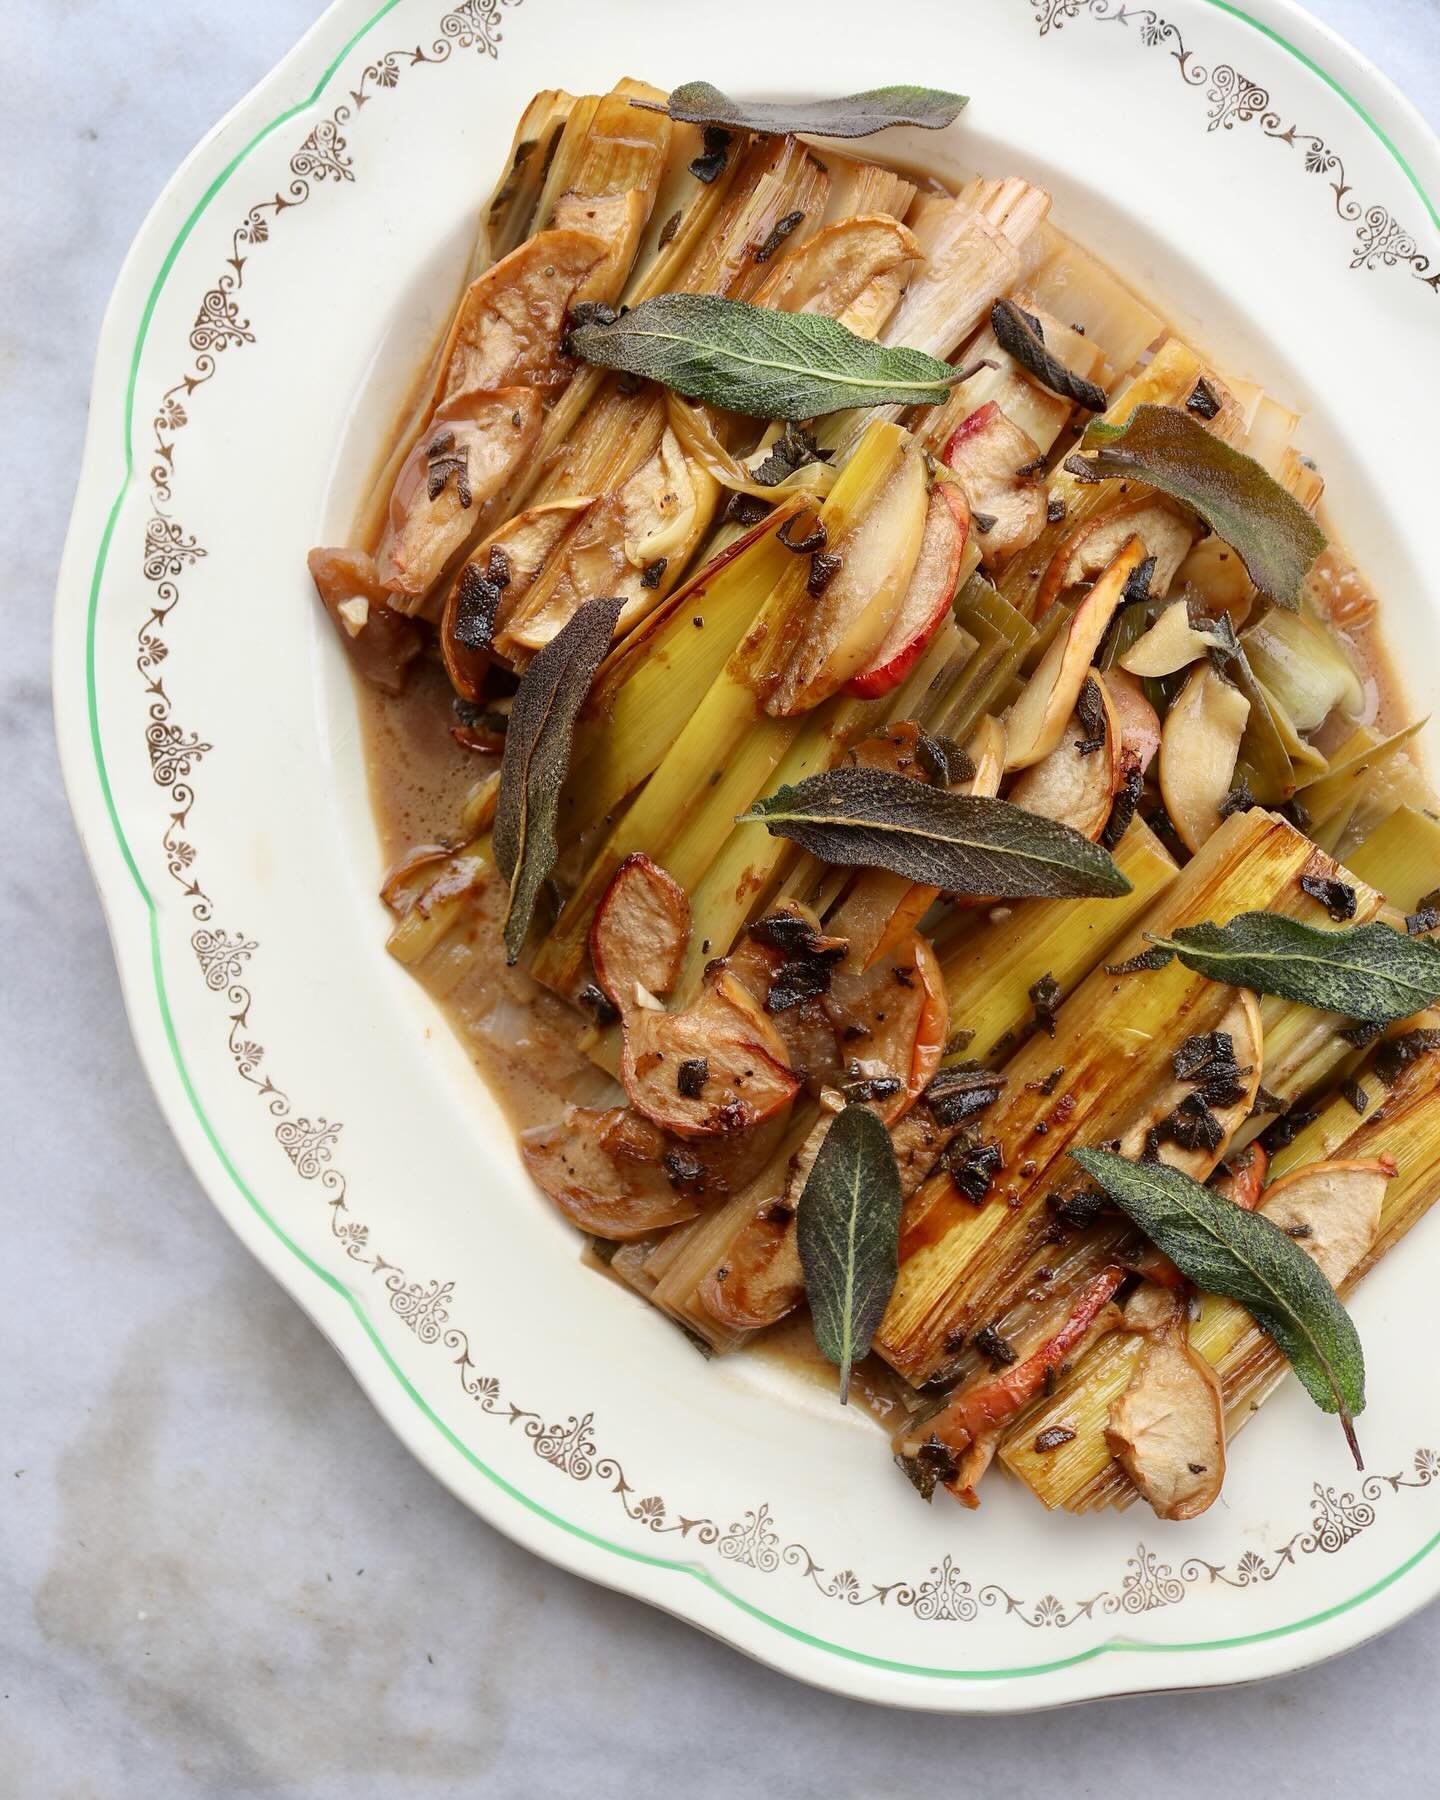 if you can tolerate reading about my new found love for boring life routines, then this week&rsquo;s newsletter has a couple of fun &amp; flavour-packed recipes for you to sink your teeth into&hellip; 

Braised leeks with apple, sage &amp; marmite ~ 